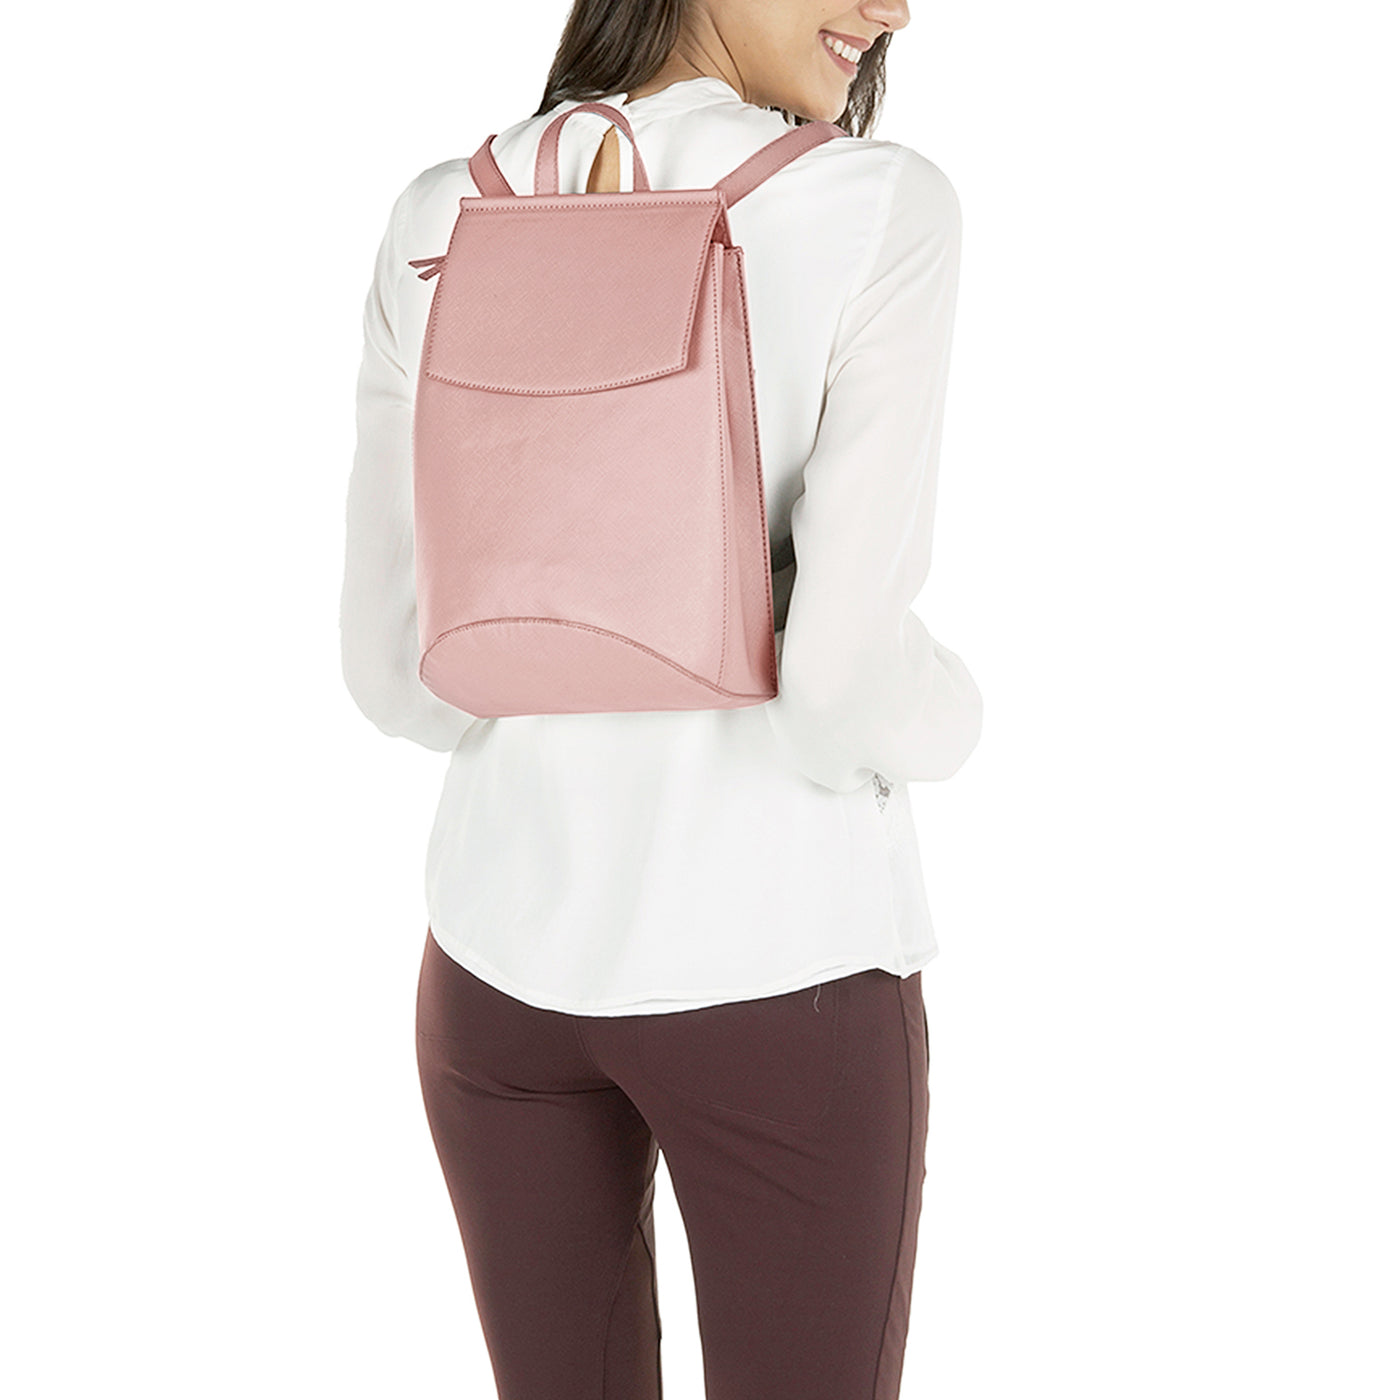 Mona B Convertible Daypack for Offices Schools and Colleges with Stylish Design for Women: Lavender